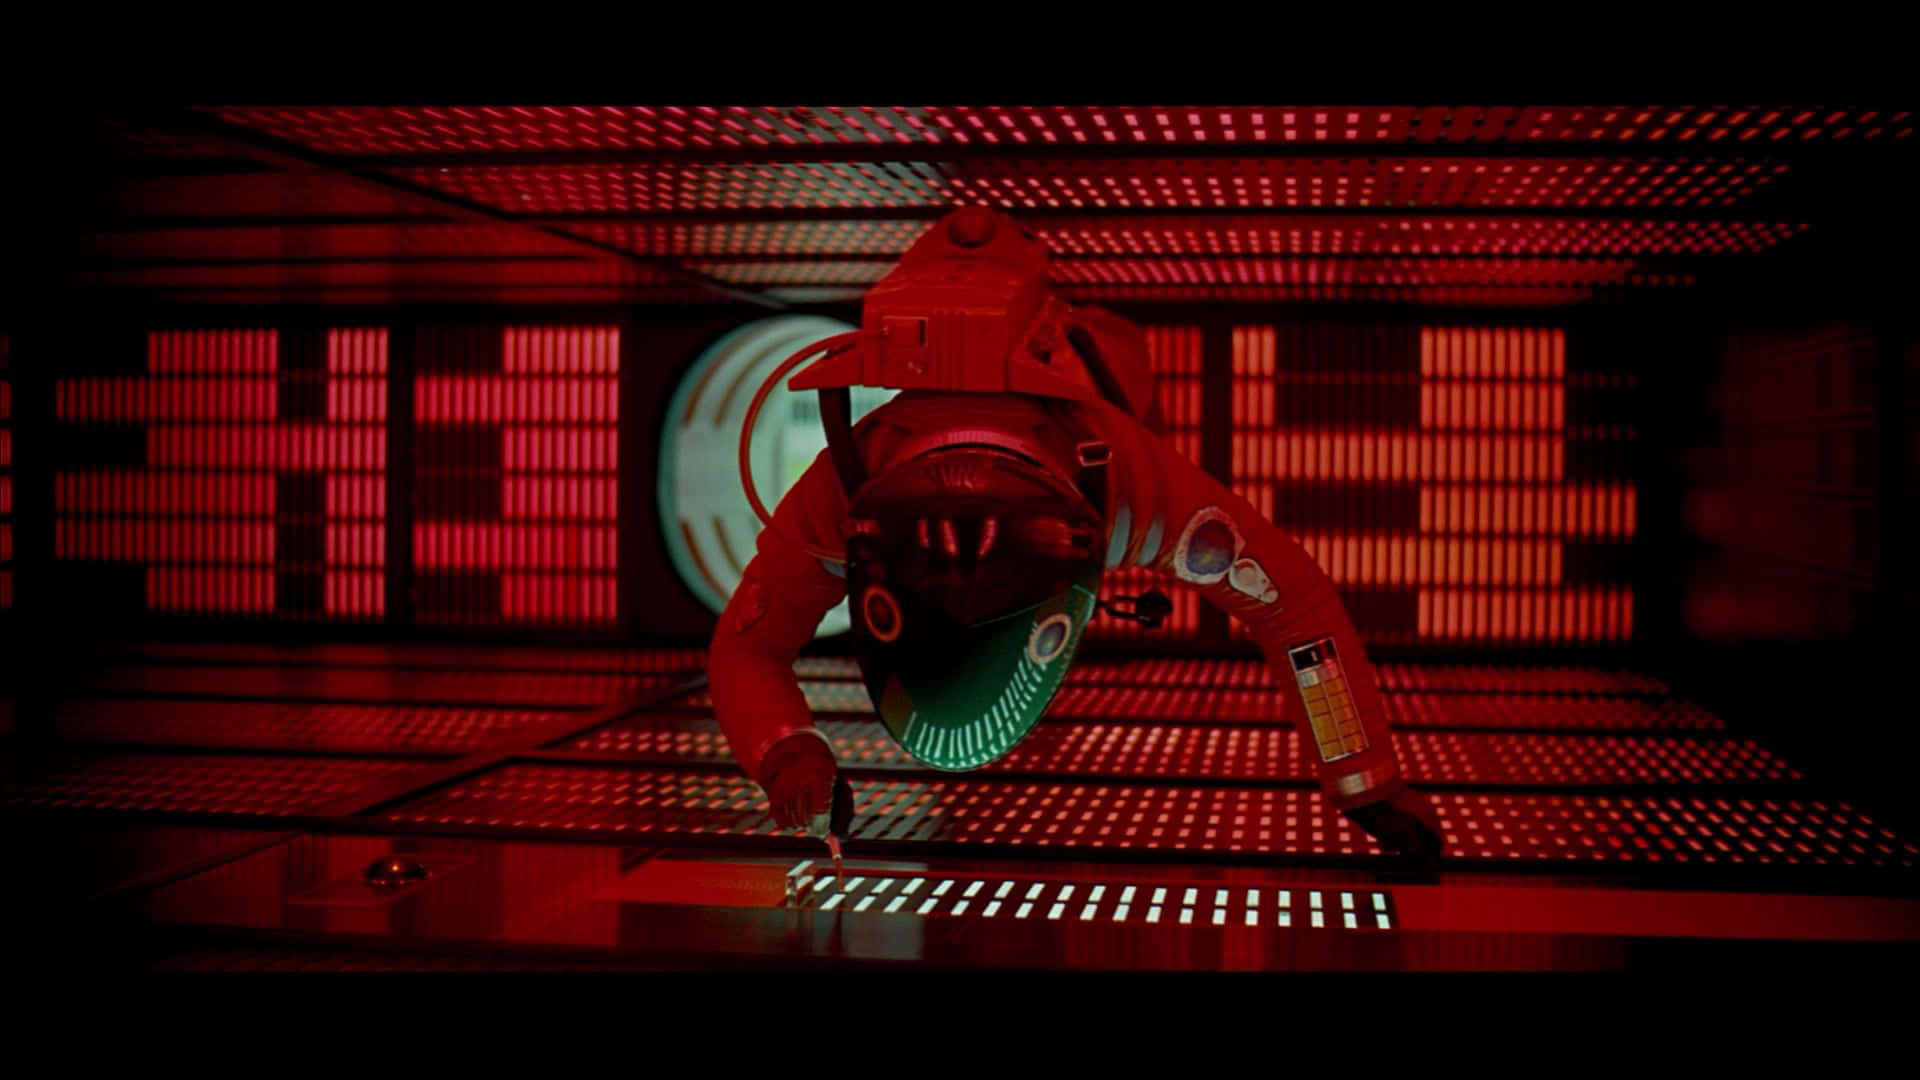 HAL9000, the iconic computer from "2001: A Space Odyssey" Wallpaper